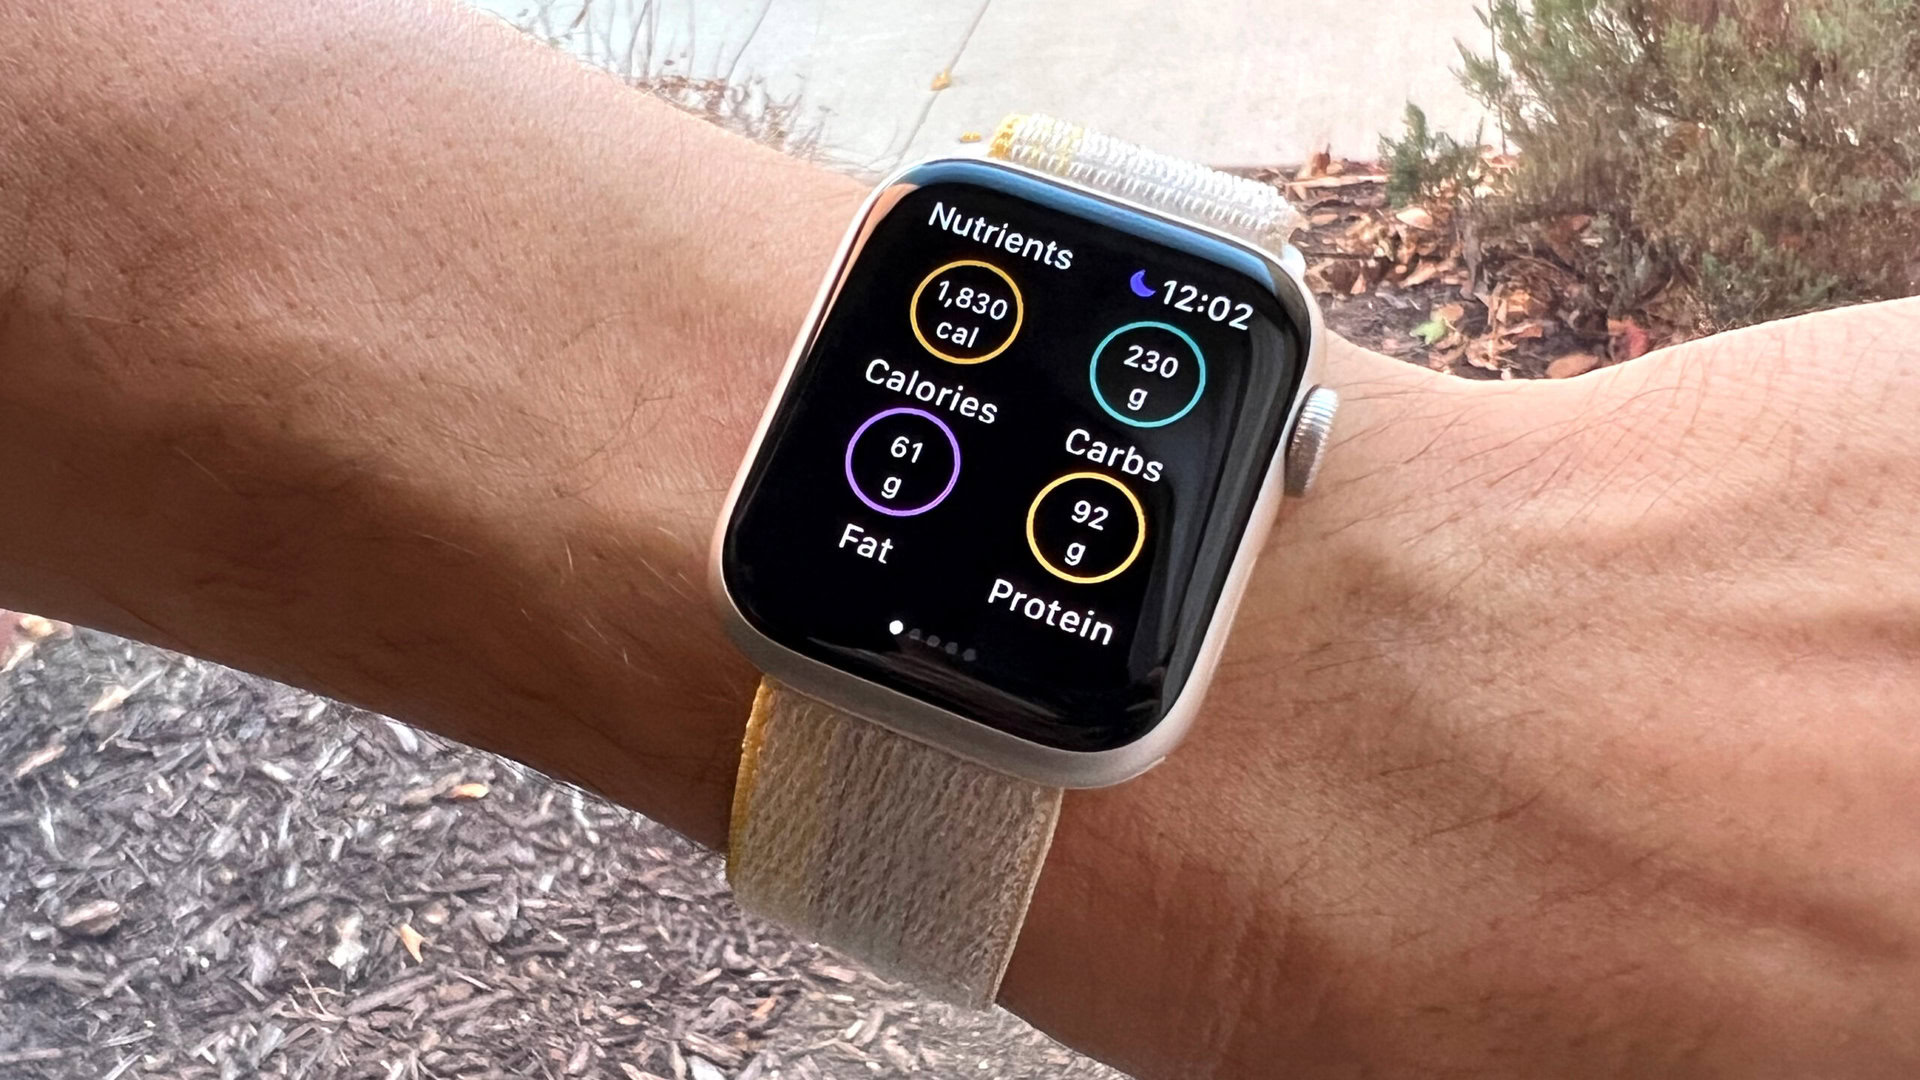 https://www.androidauthority.com/wp-content/uploads/2022/11/Apple-Watch-SE-MyFitnessPal-scaled.jpg